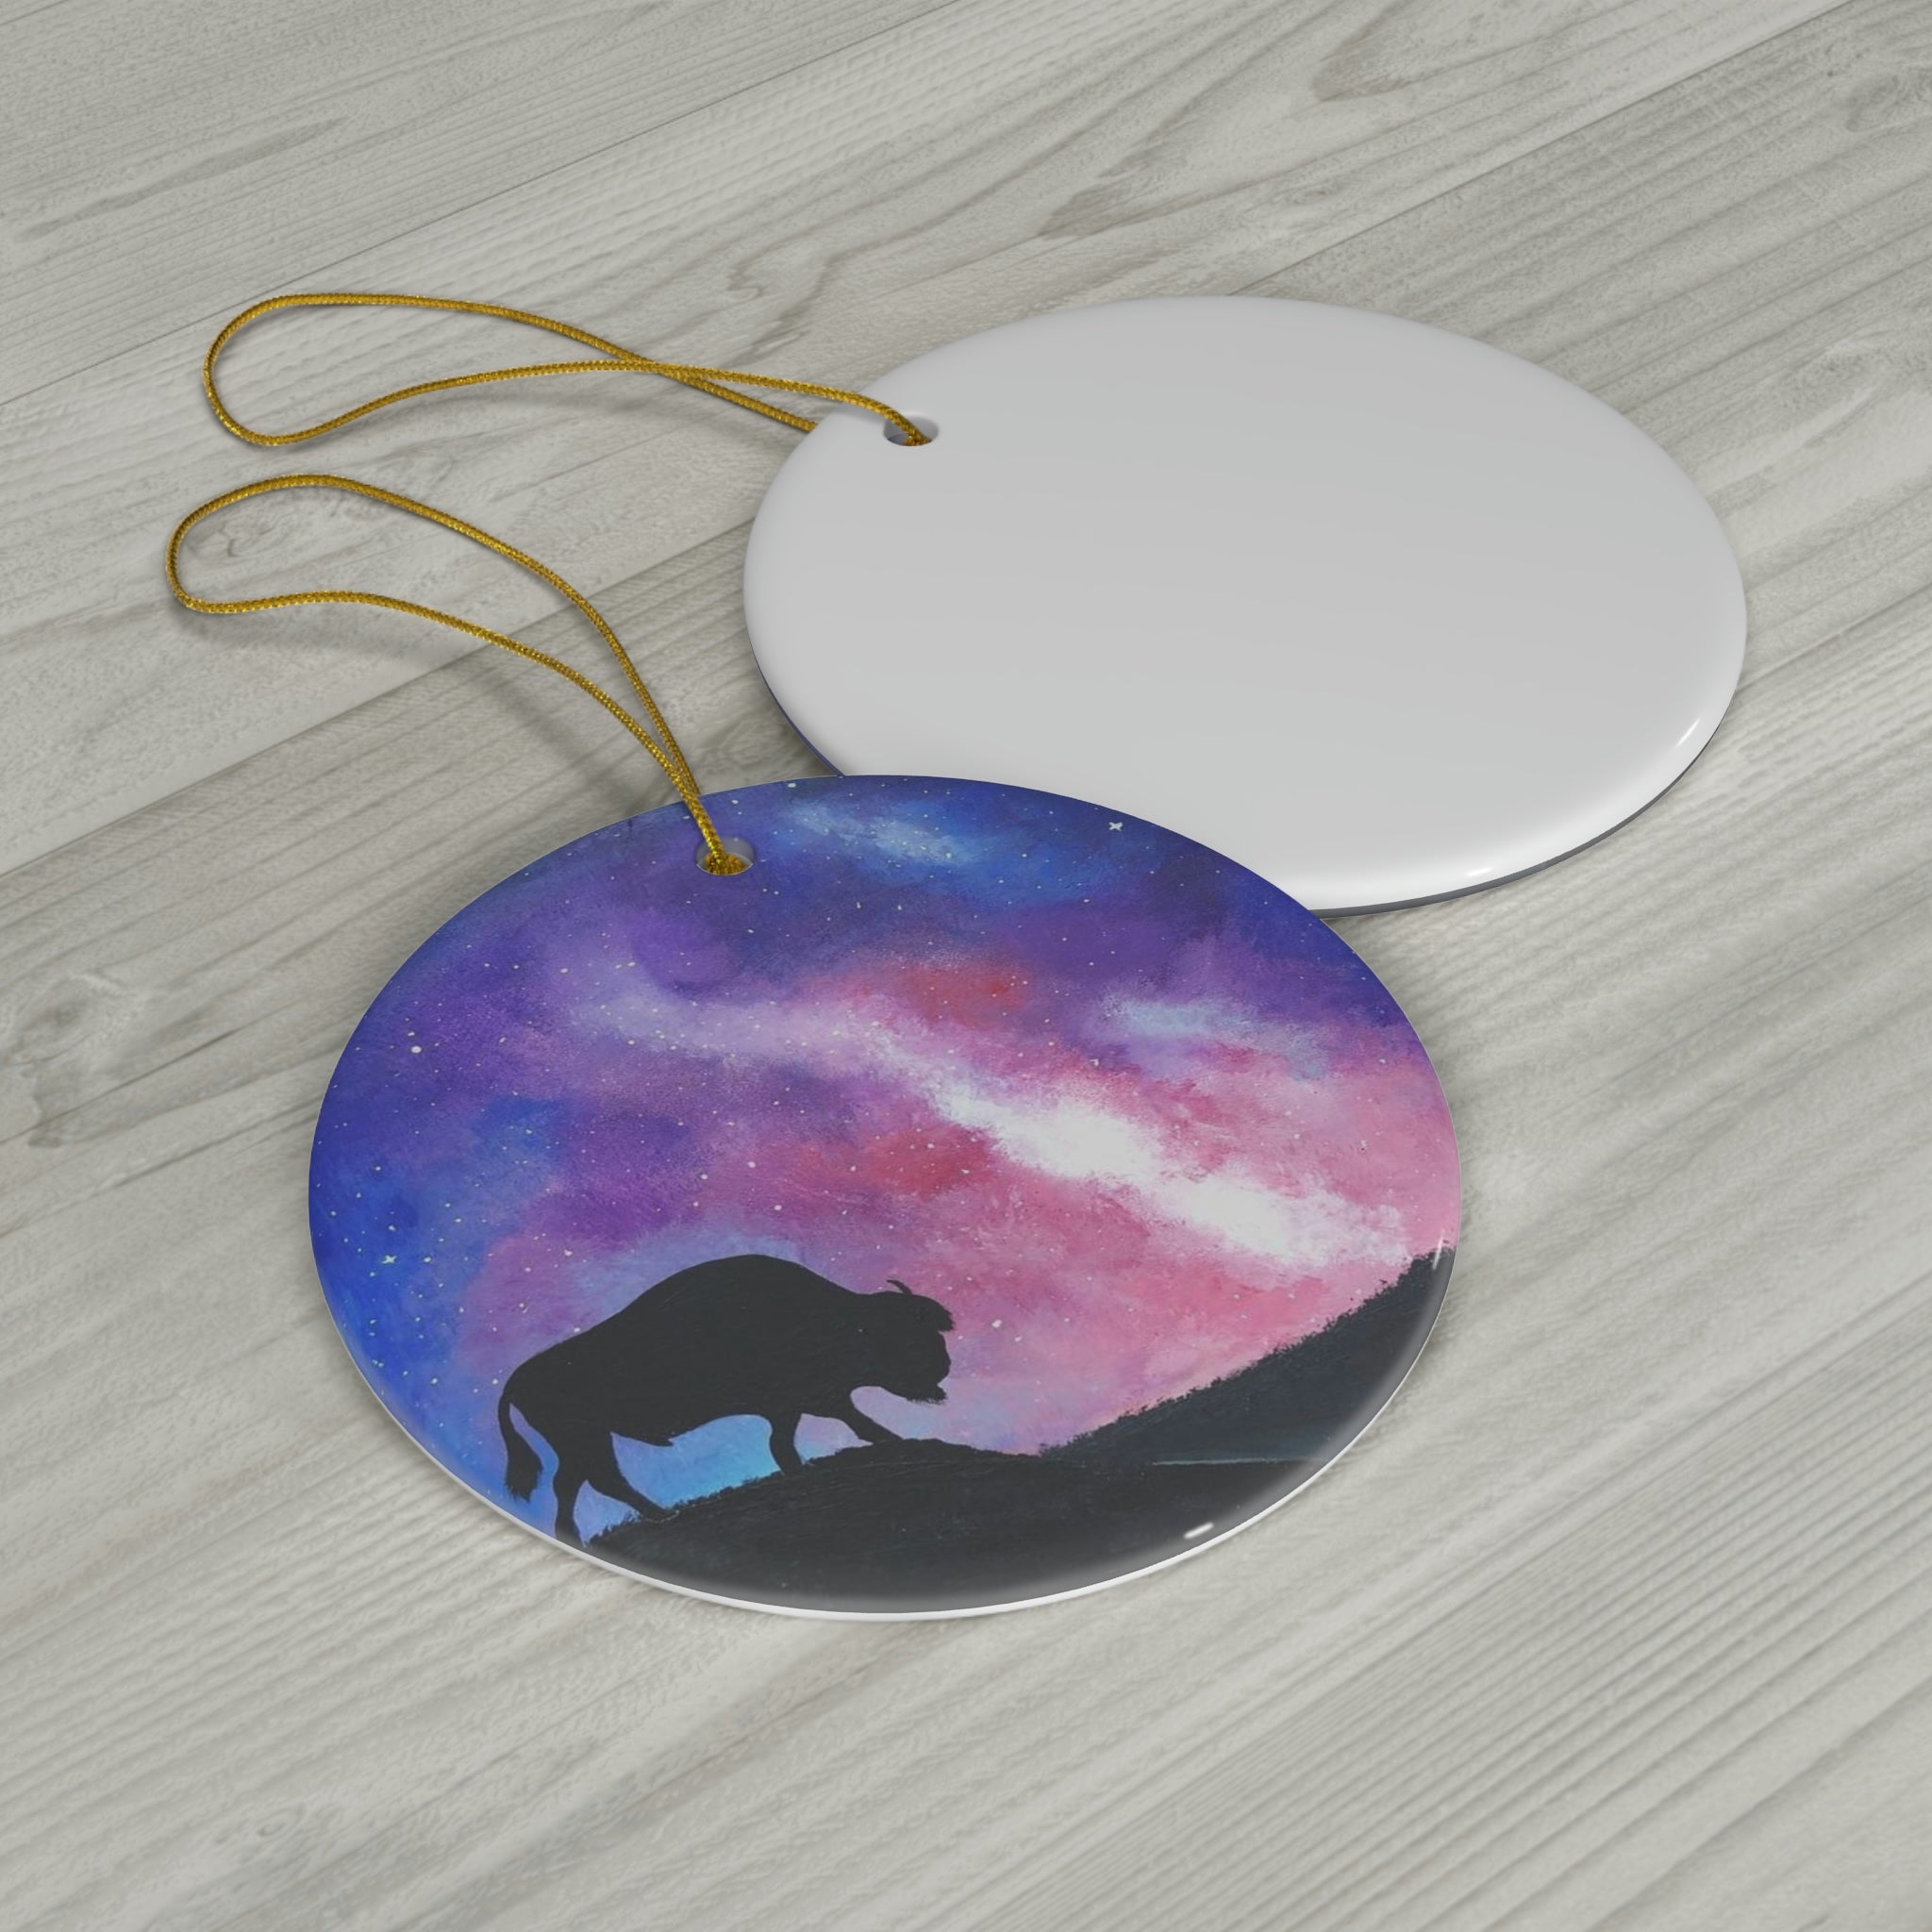 bison ornament - With the tees